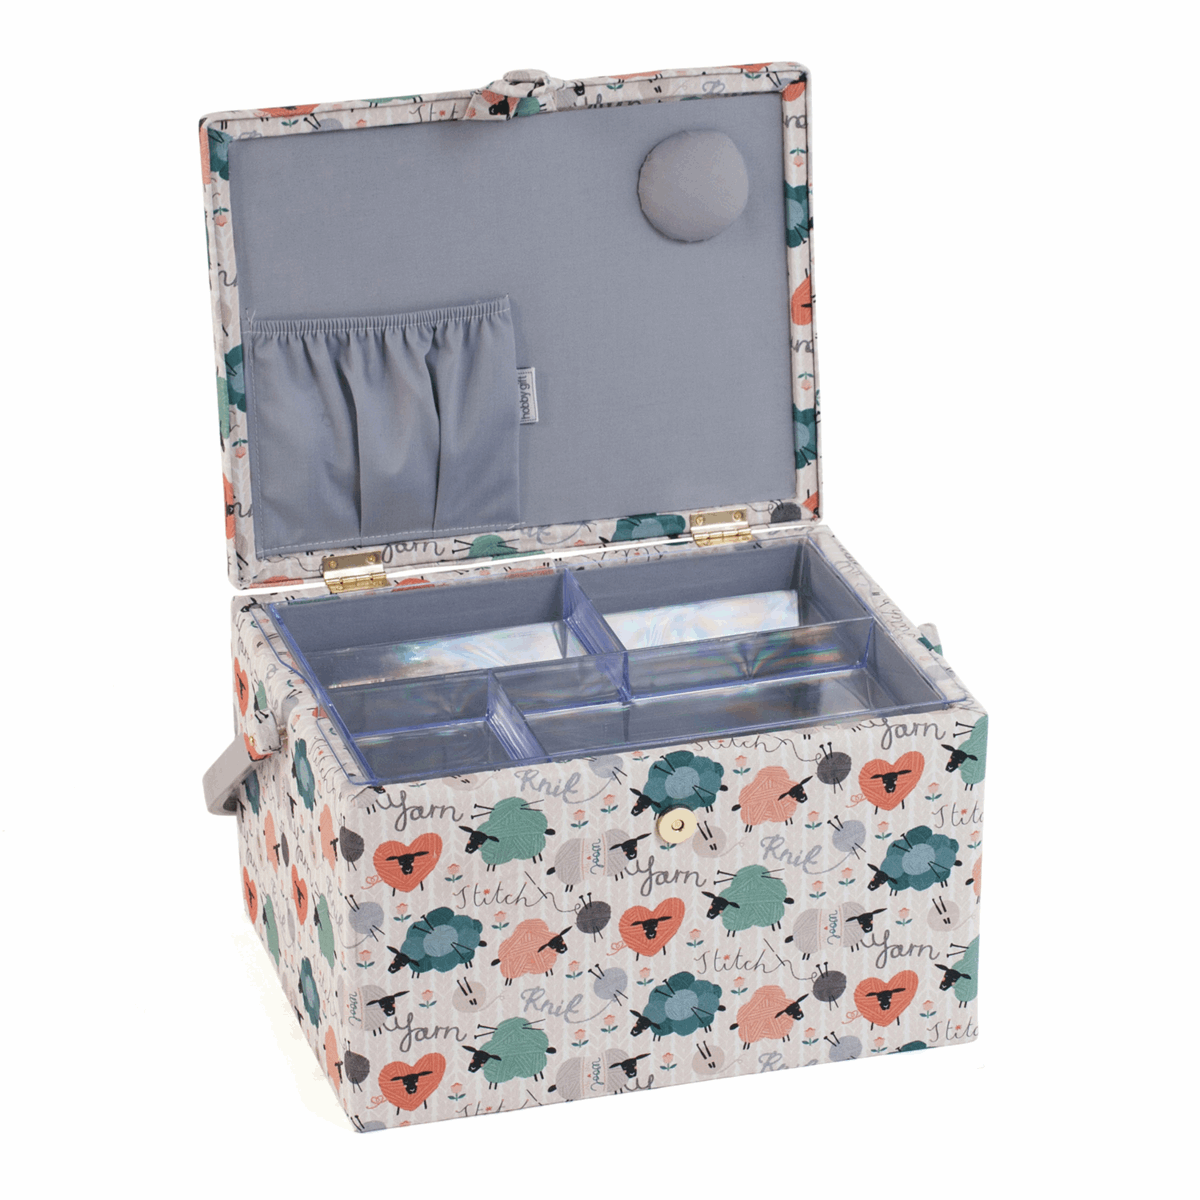 Knit Happens Sewing Box - Large